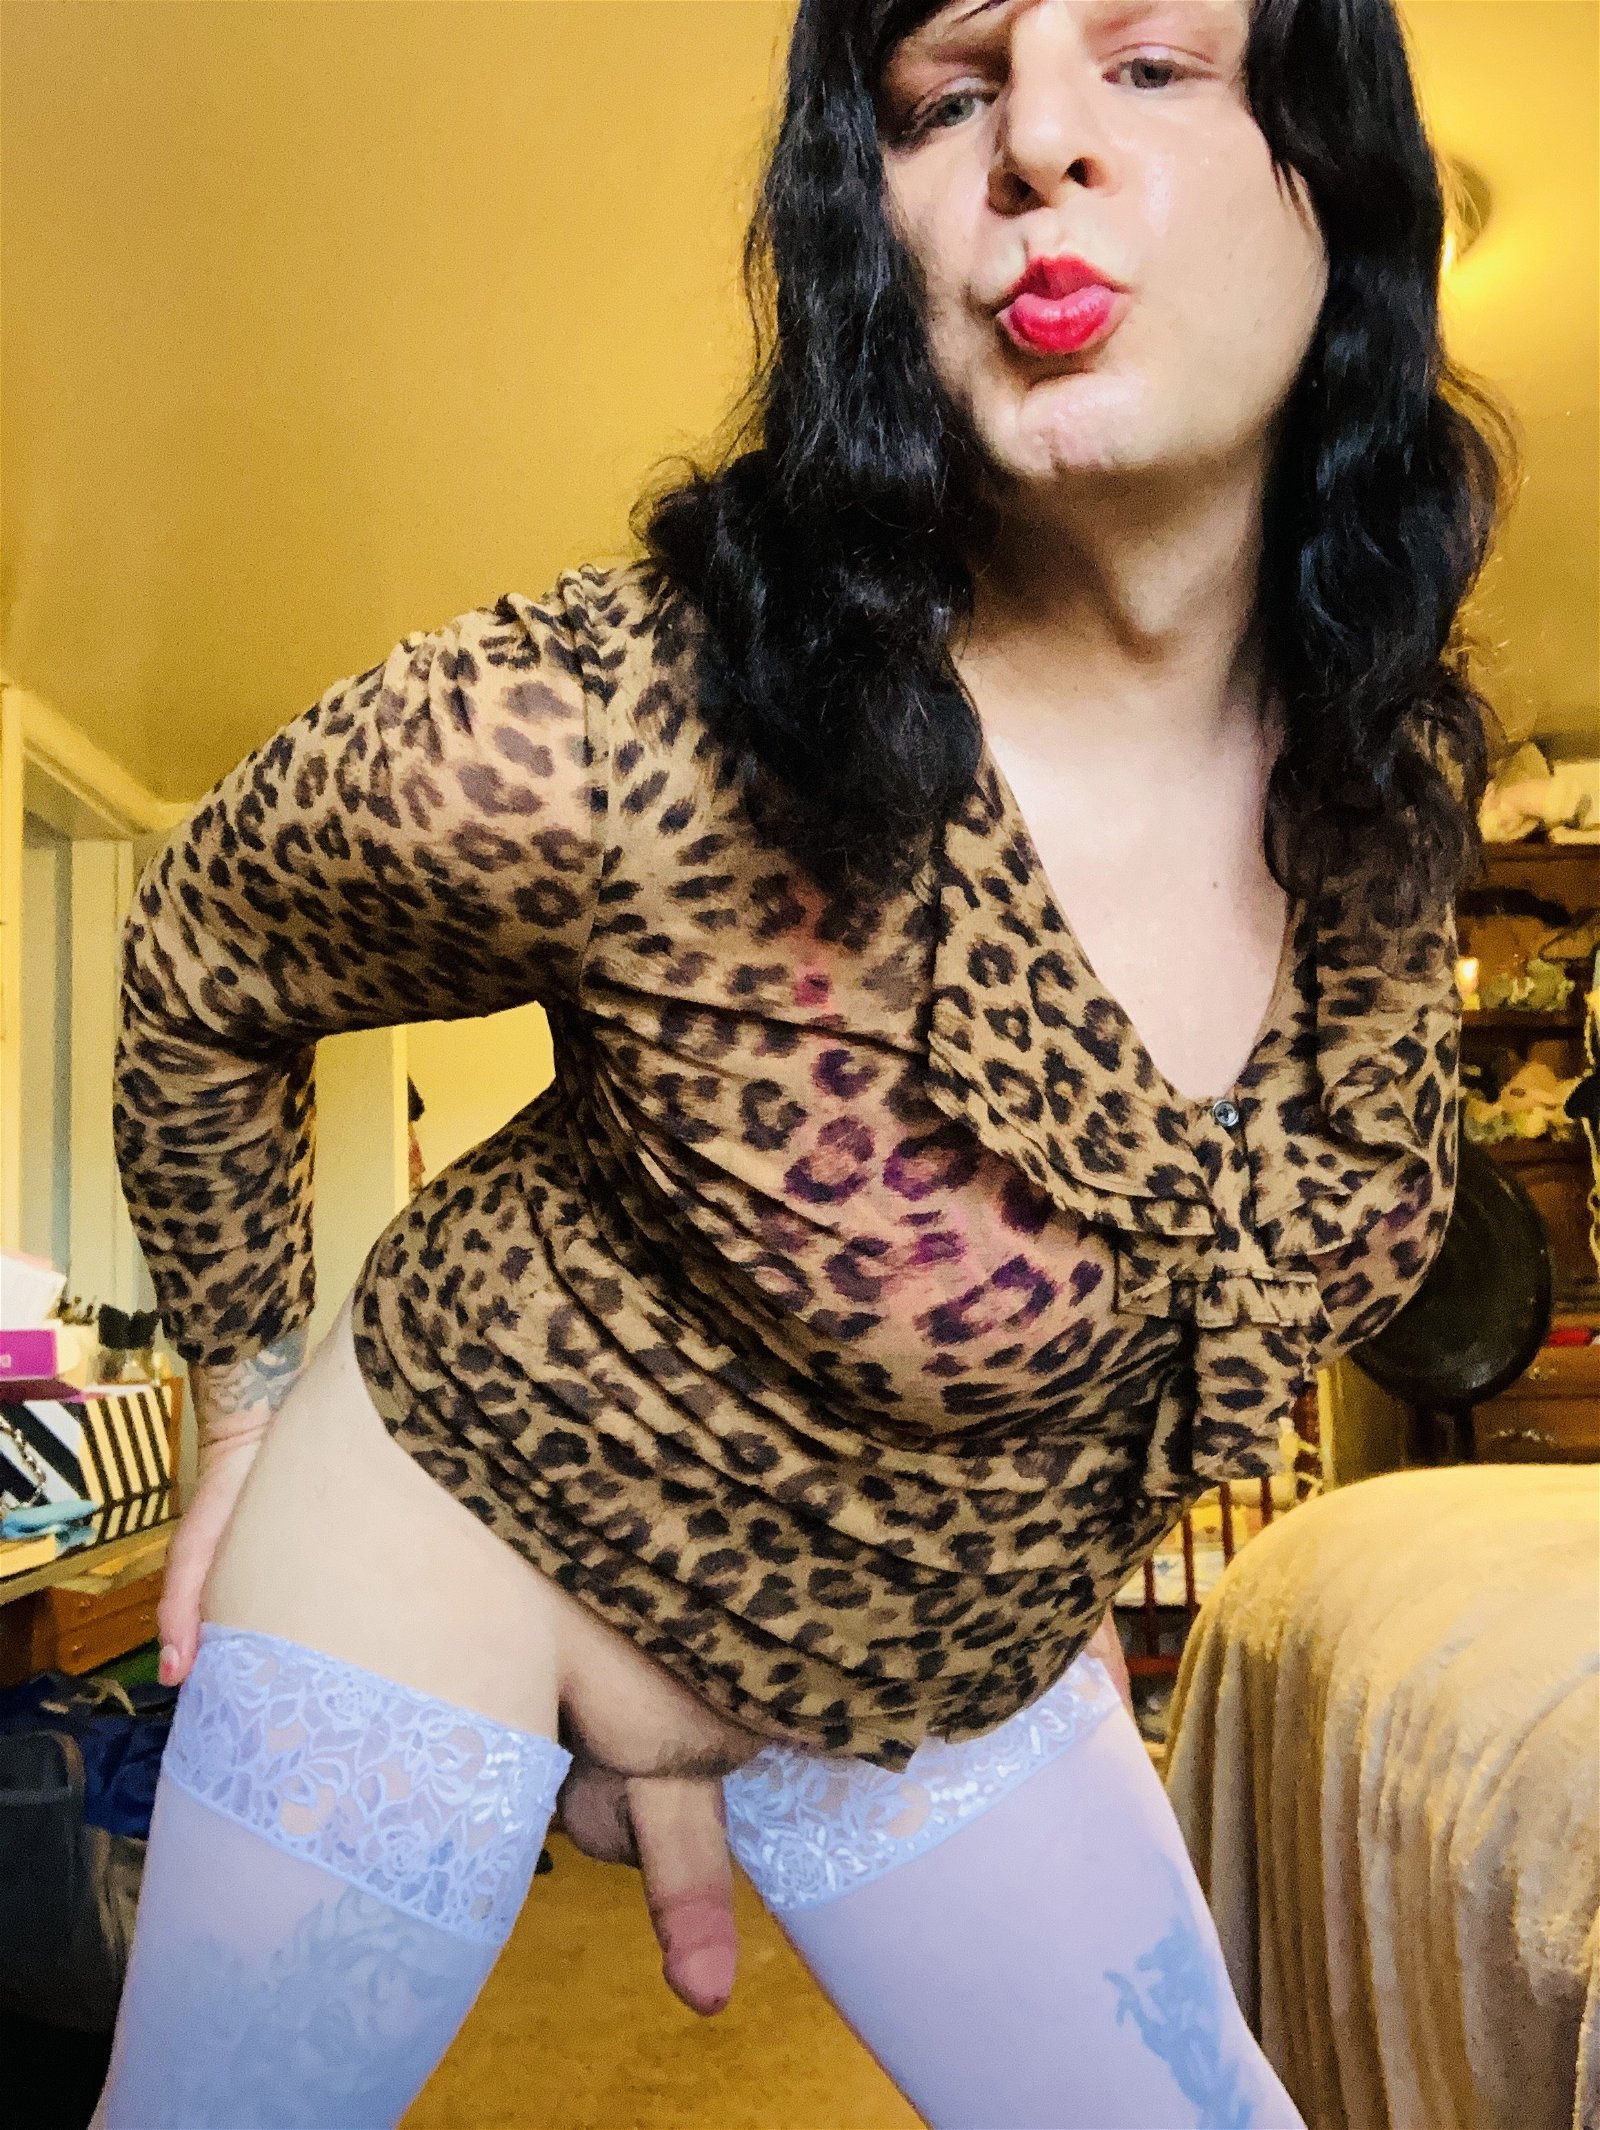 Photo by DangerMarcy with the username @DangerMarcy, who is a verified user,  July 3, 2022 at 1:43 AM. The post is about the topic Hot Shemale Pics and the text says 'Random Sissy Pics of Myself. Send me all the cock pics you want🥰
I love random cock pics, as I am addicted to cock and yummy cum like a proper sissy whore💋
#transwoman #tgirl #transgender #sissyslut #sissywhore #ilovecock #slut #whore #gay #bisexual..'